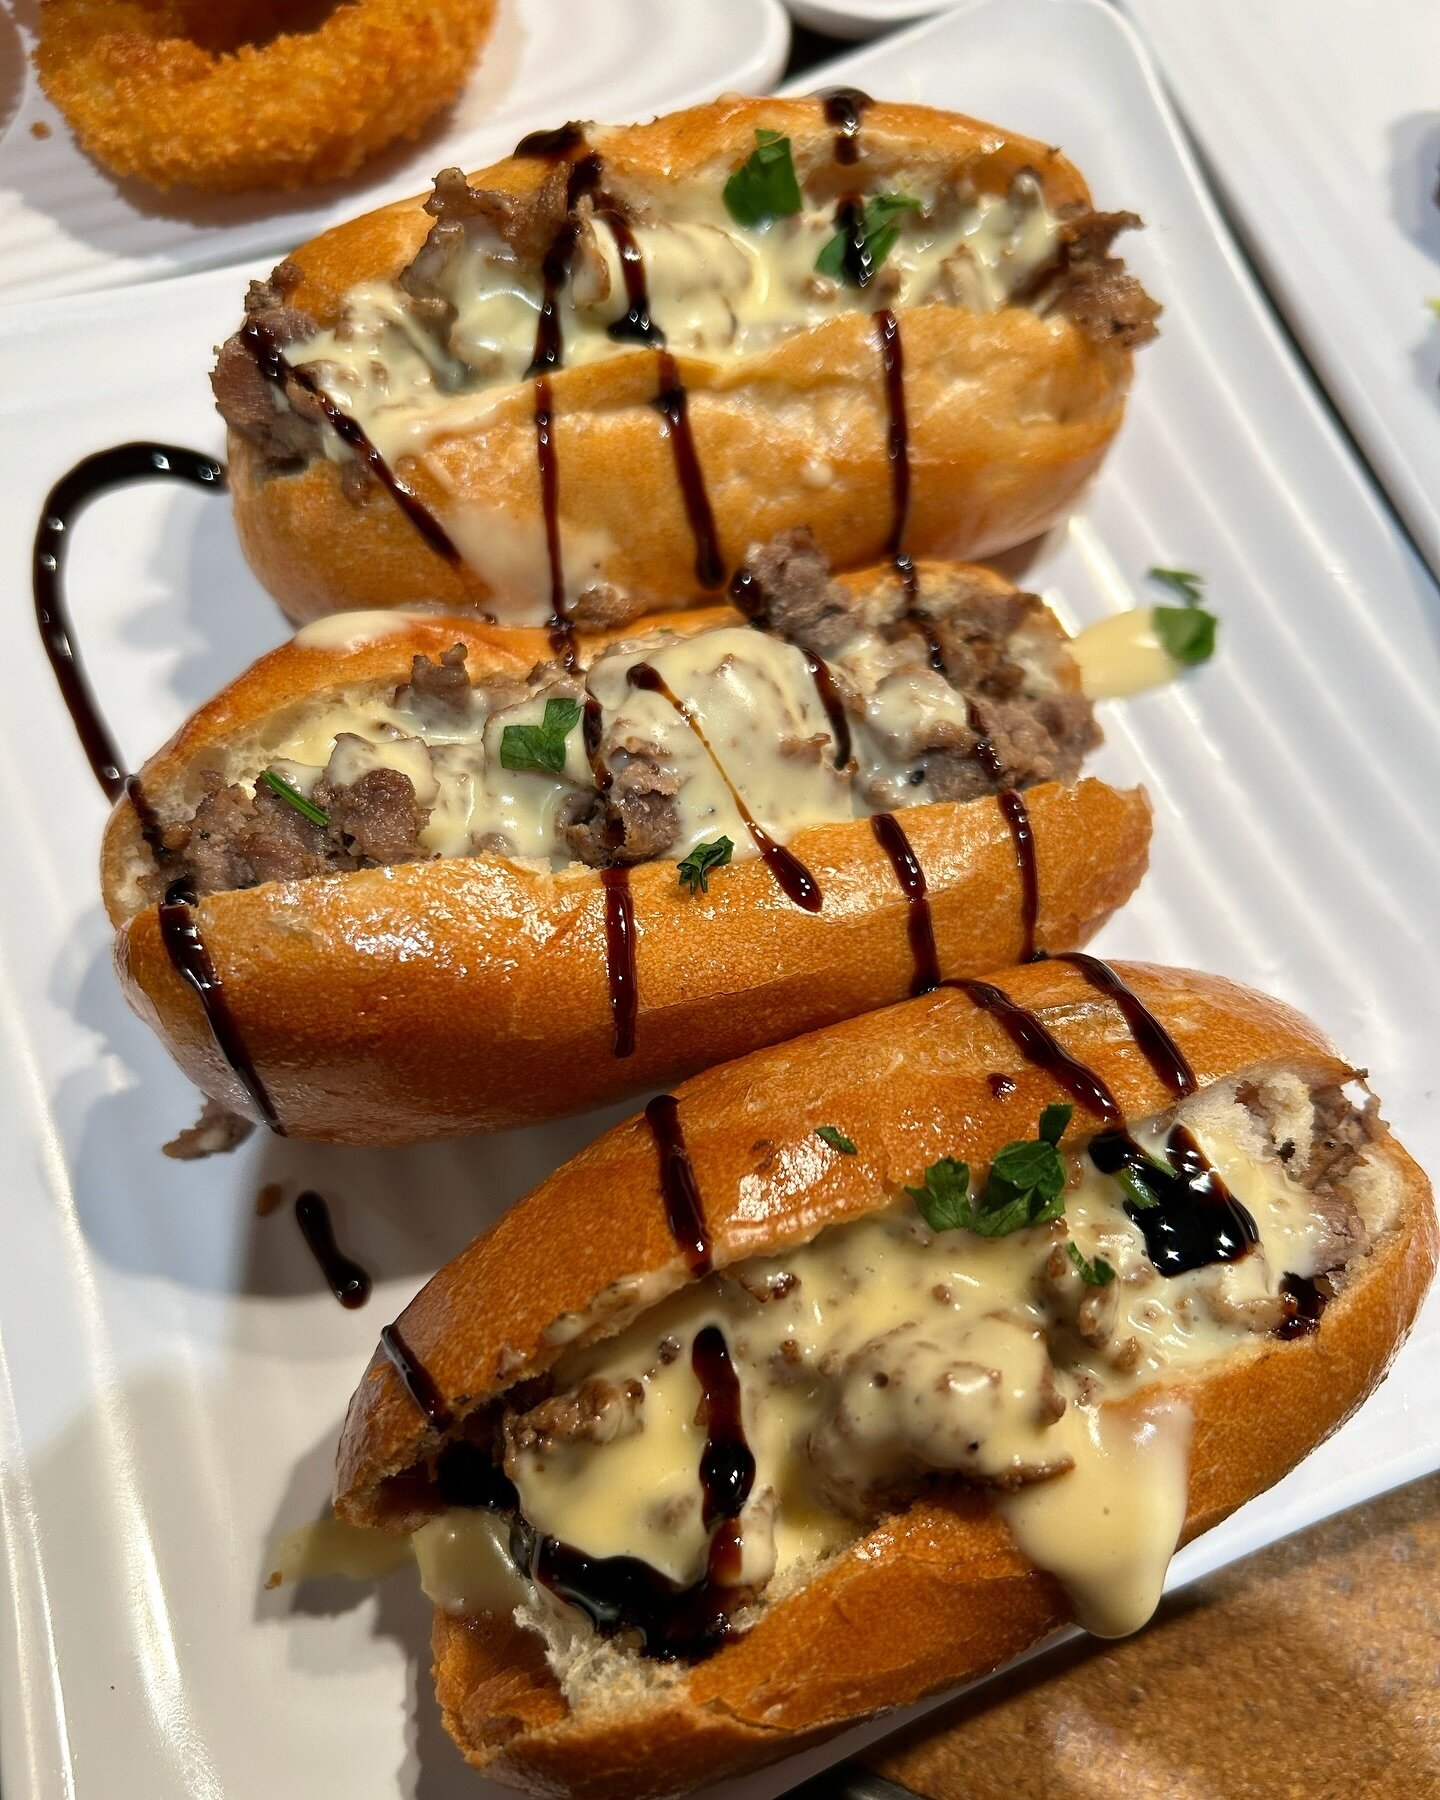 Cheesesteak Sliders 🤤 $7 for happy hour! Perfect if you just want a bite of a classic Philly cheesesteak! 
.
.
.
.

#happyhour #phillyhappyhour #philly #phillybars #pizza #beer #happyhourphilly #centercity #sips #midtownvillage #highnoon #phillybars